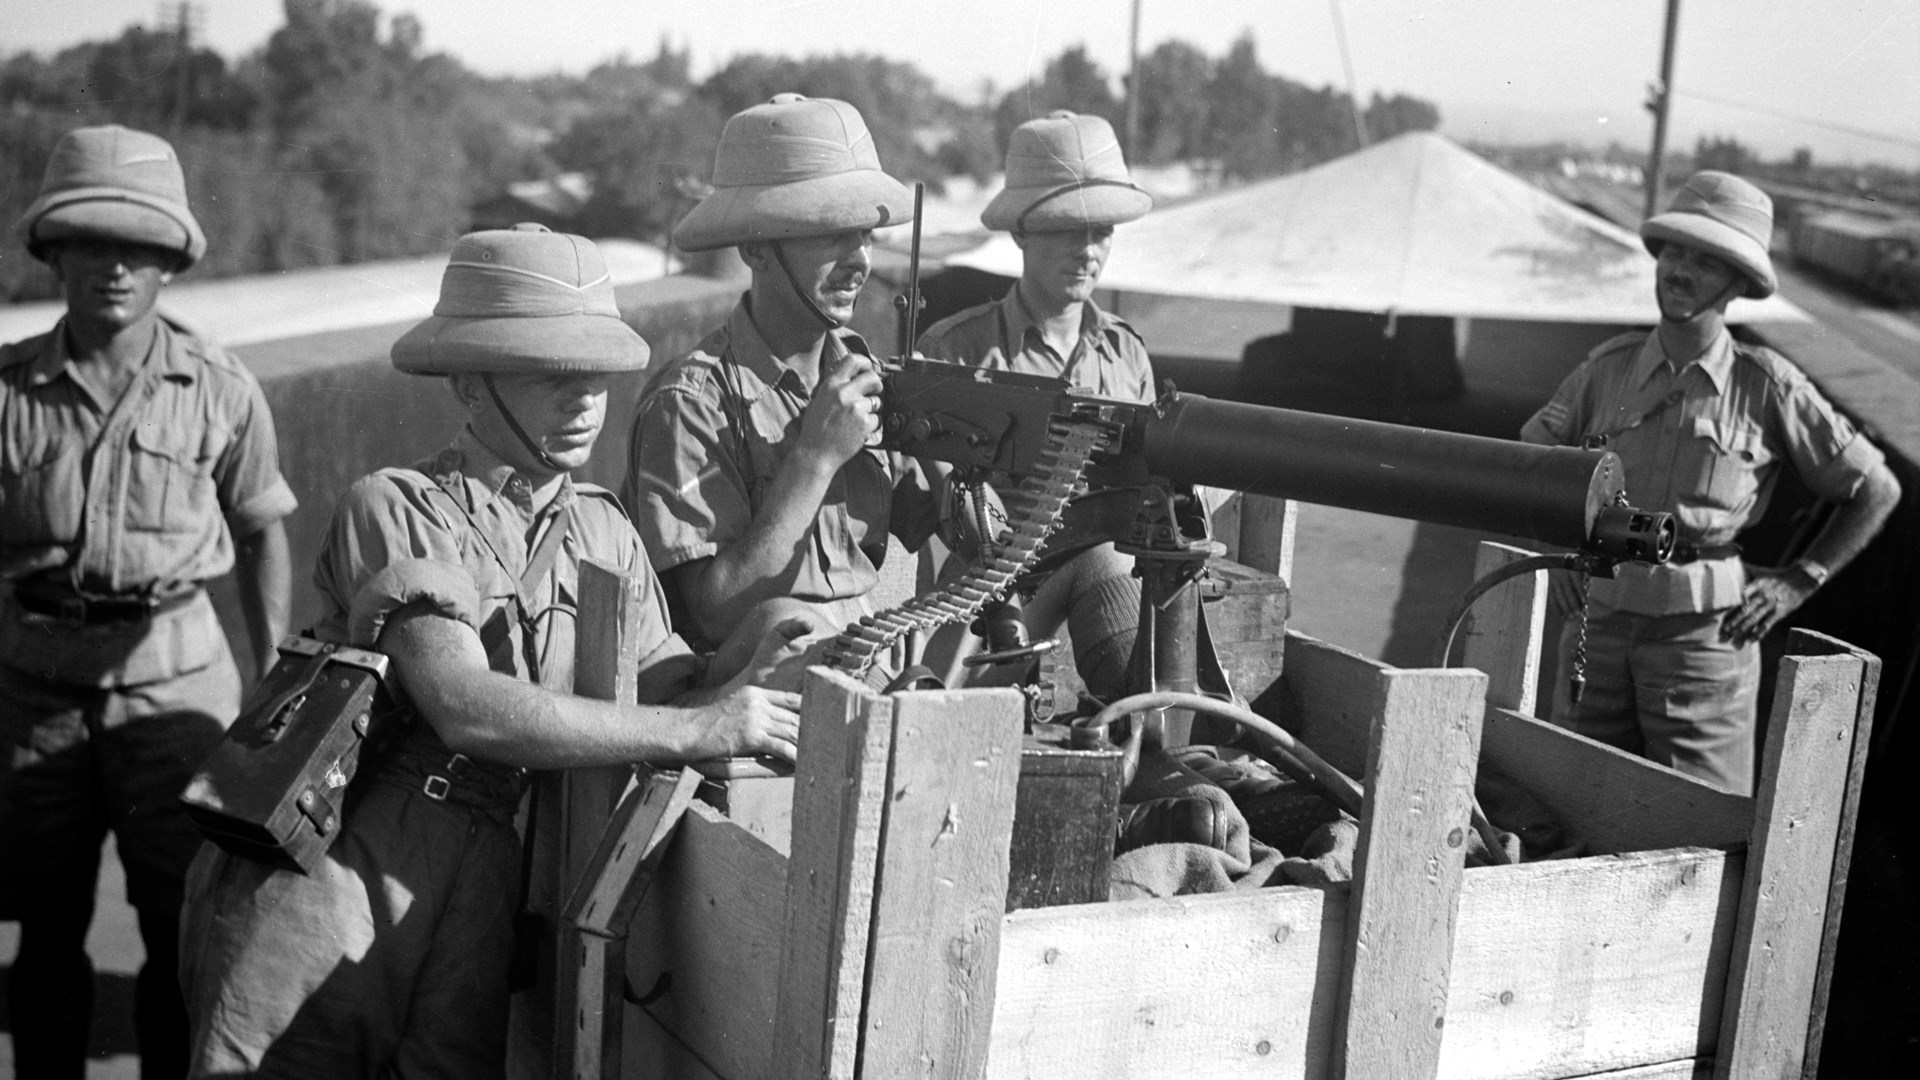 The Vickers machine gun was one of the dominant infantry weapons of the two World Wars.  This example covers a railroad station in Palestine—the smooth water jacket indicates this was one of the Vickers MGs made at Crayford in early 1937.  Library of Congress